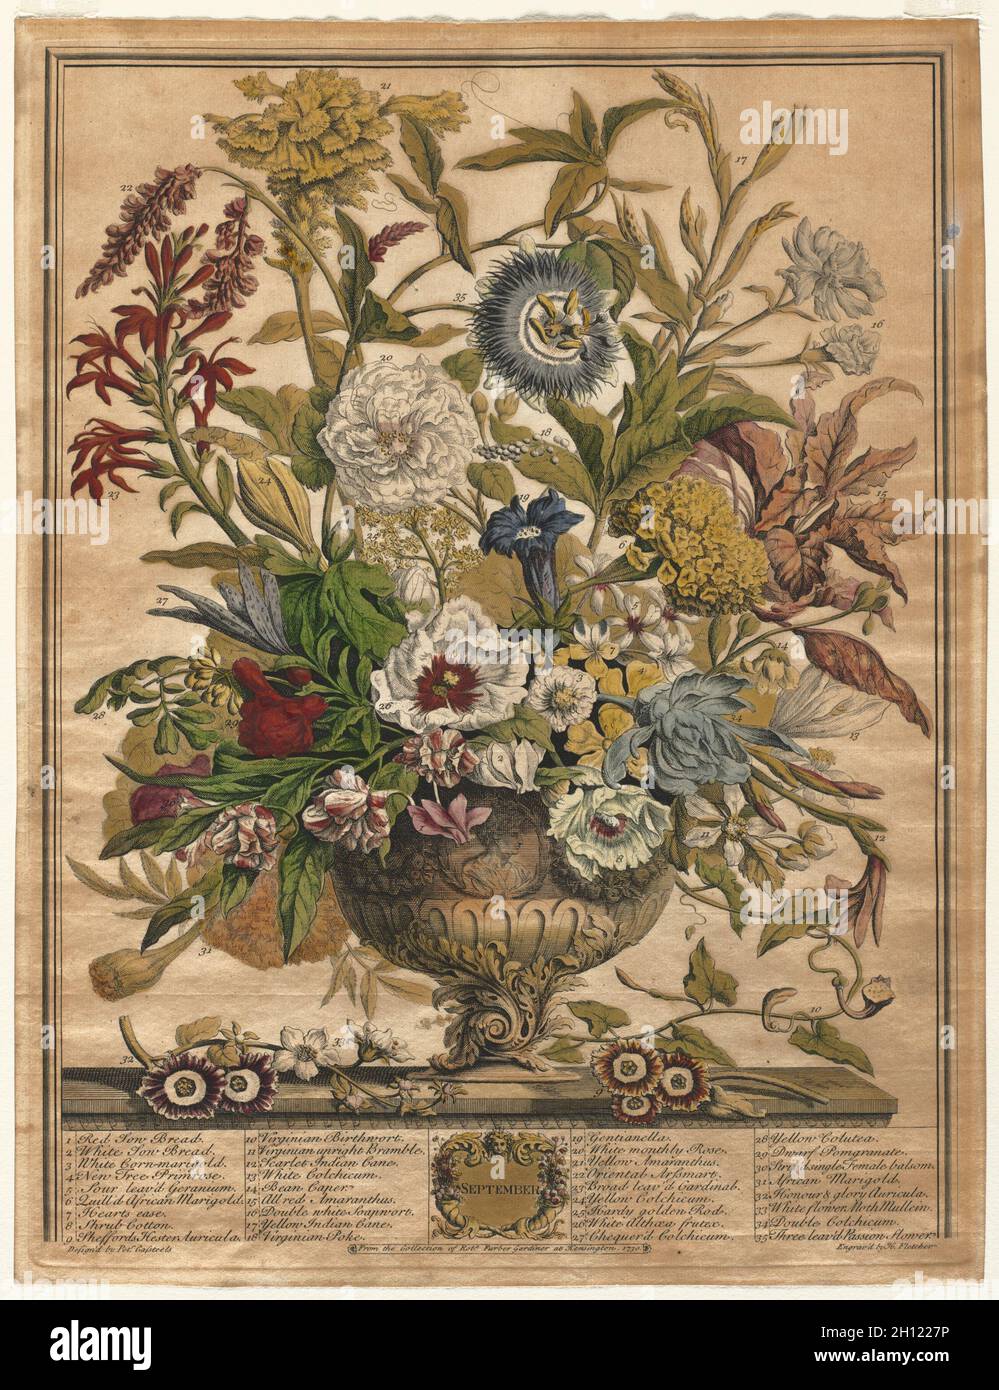 Twelve Months of Flowers: September, 1730. Henry Fletcher (British, active 1715-38). Engraving, hand-colored; sheet: 42.2 x 32.4 cm (16 5/8 x 12 3/4 in.); platemark: 40.9 x 31.4 cm (16 1/8 x 12 3/8 in.). Stock Photo